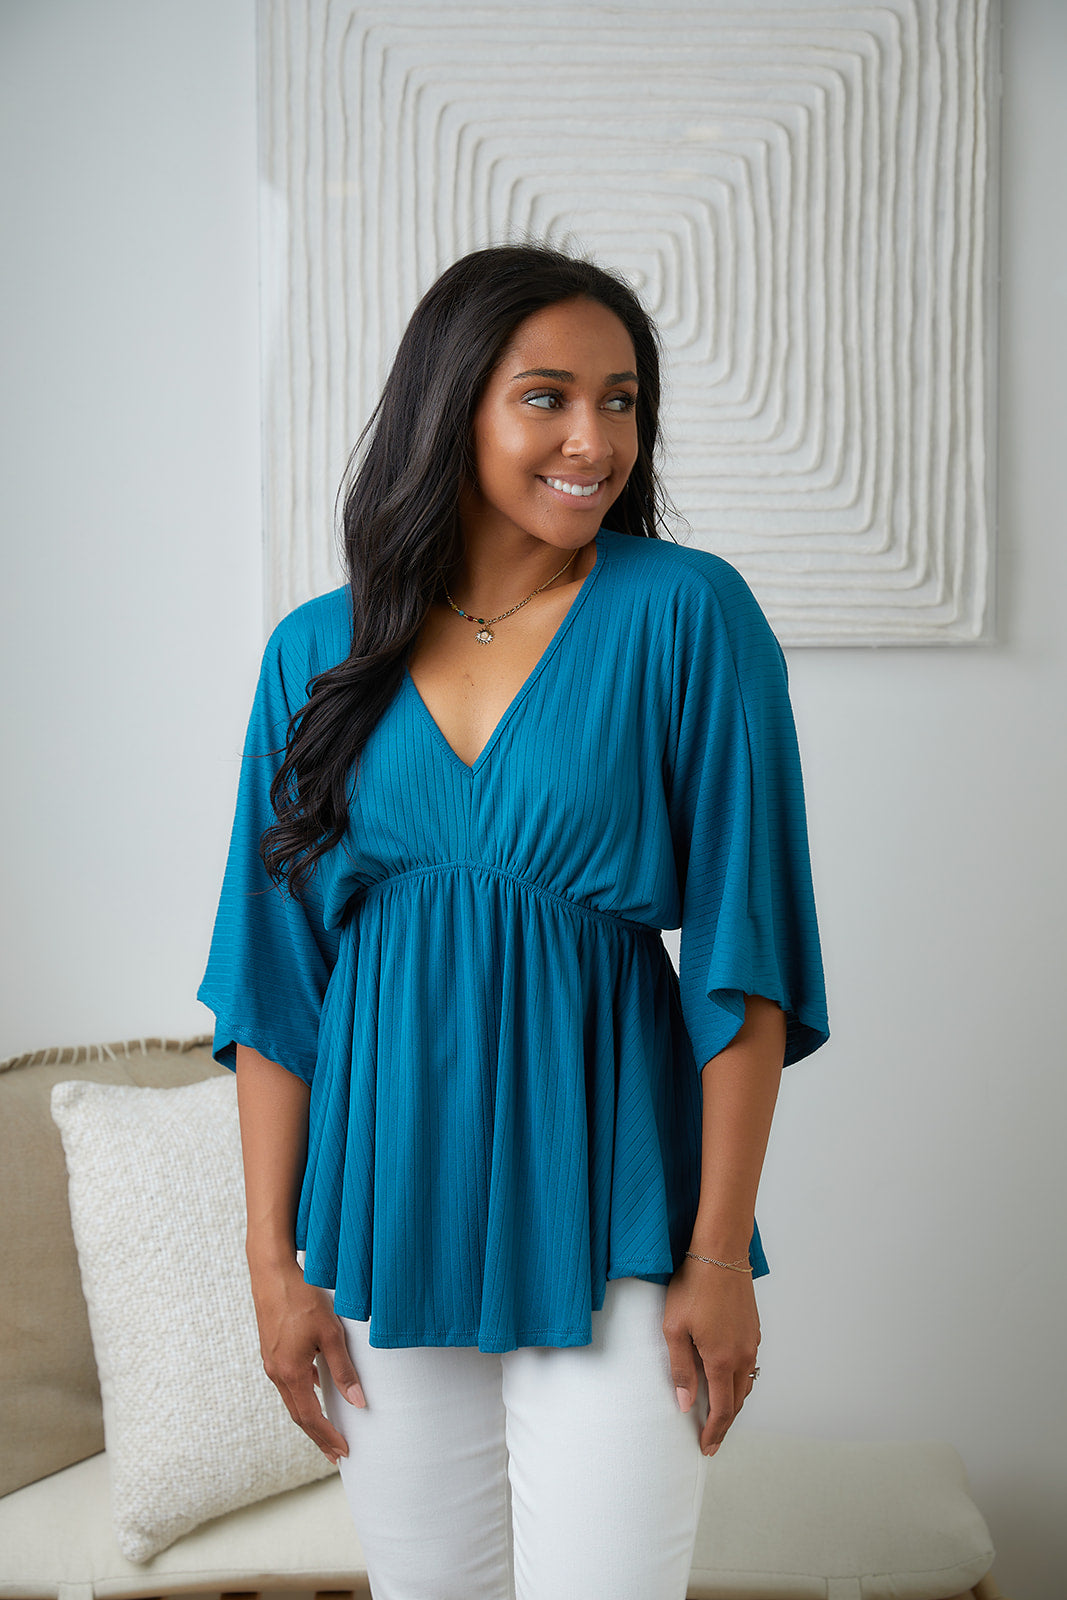 Storied Moments Draped Peplum Top in Teal - WEBSITE EXCLUSIVE